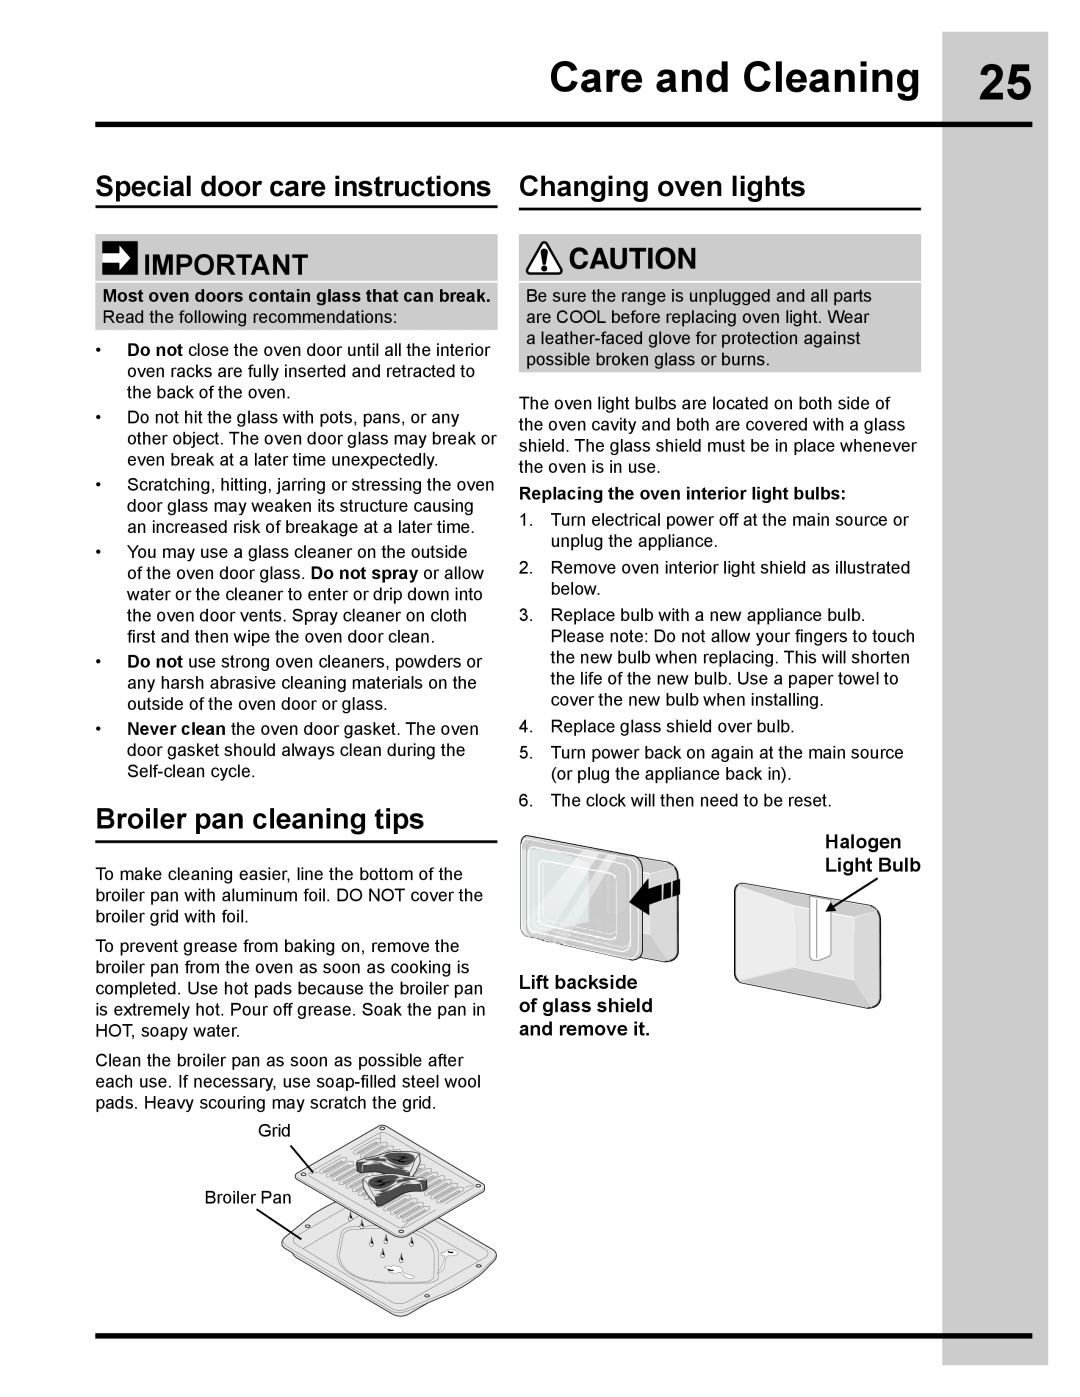 Electrolux 318205134 Care and Cleaning, Special door care instructions Changing oven lights, Broiler pan cleaning tips 